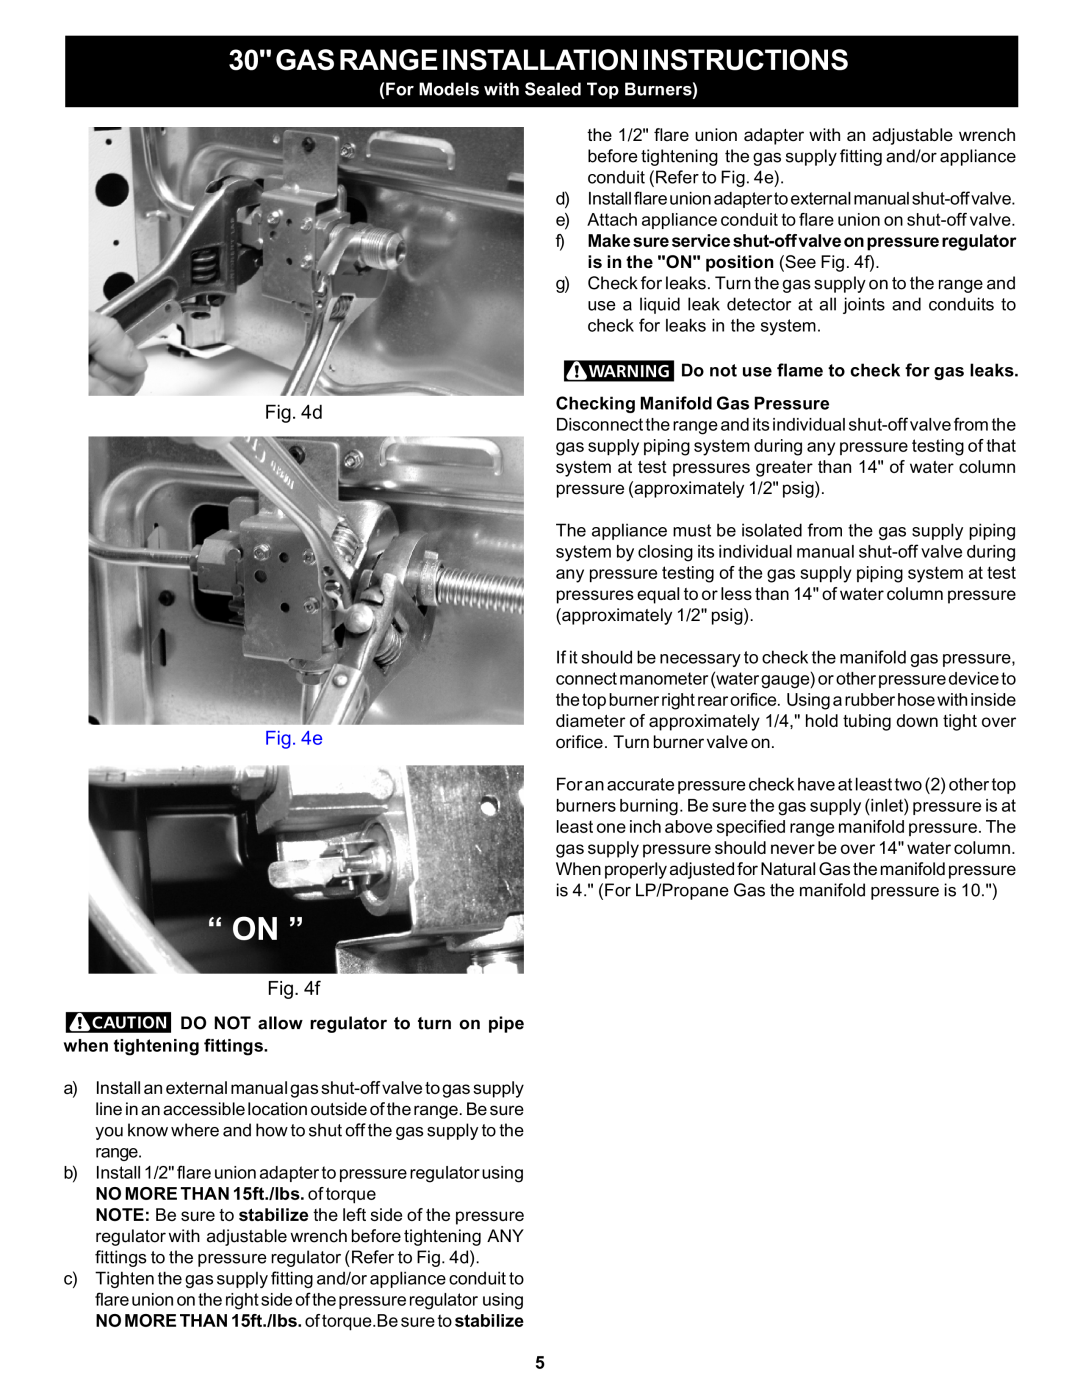 Bosch Appliances HGS5053UC manual “ On ”, f, 30GASRANGEINSTALLATIONINSTRUCTIONS, For Models with Sealed Top Burners 